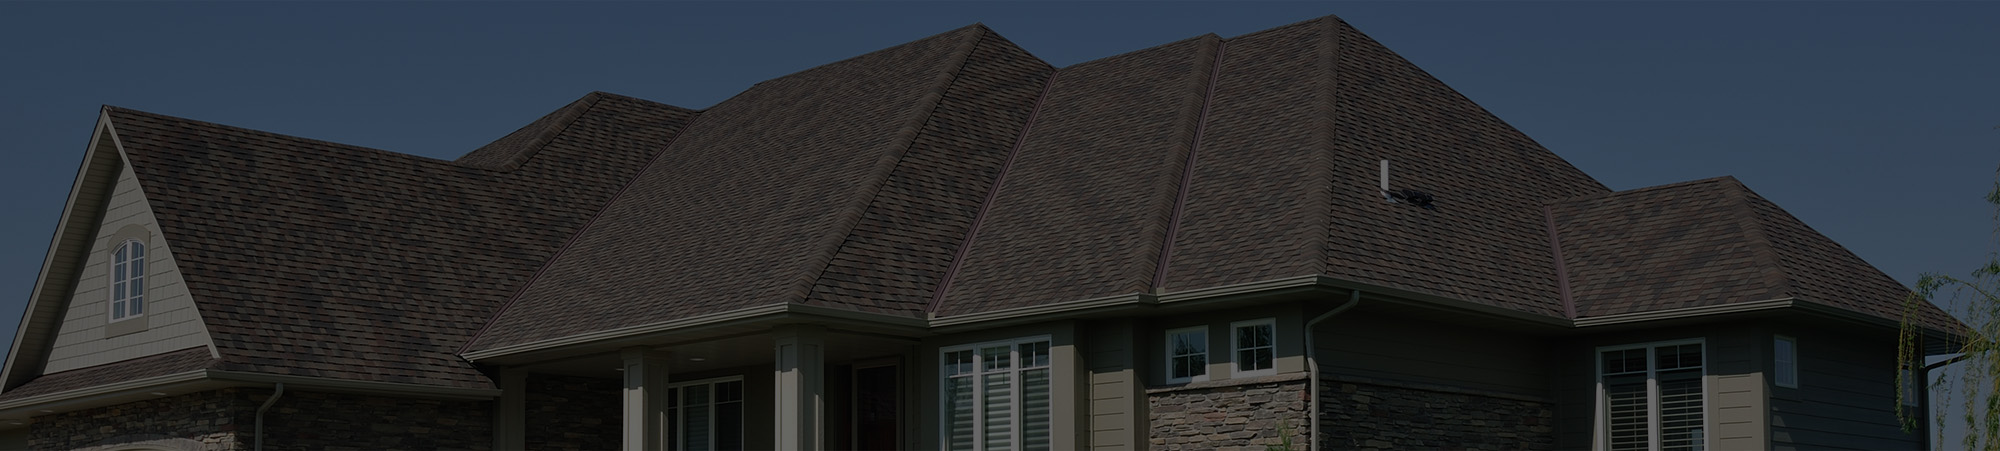 roof financing options in green bay